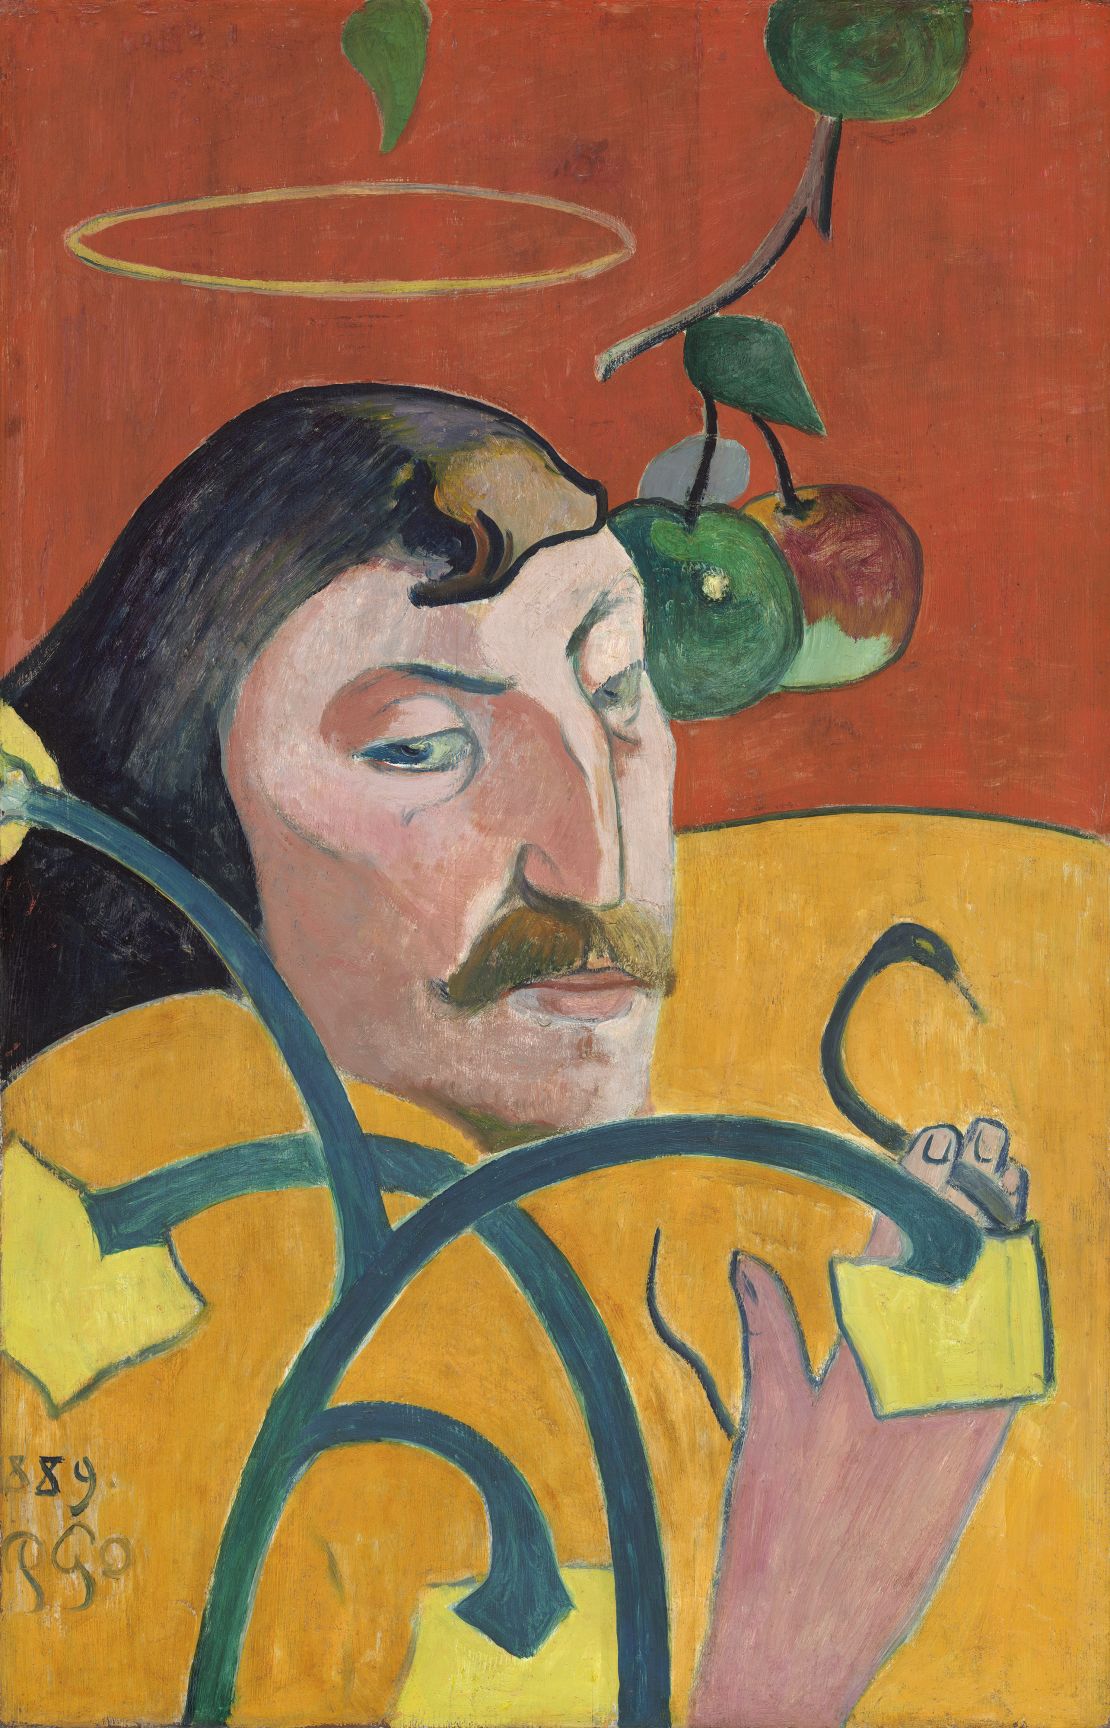 An 1889 self-portrait by Paul Gauguin who some have speculated died from syphilis. 